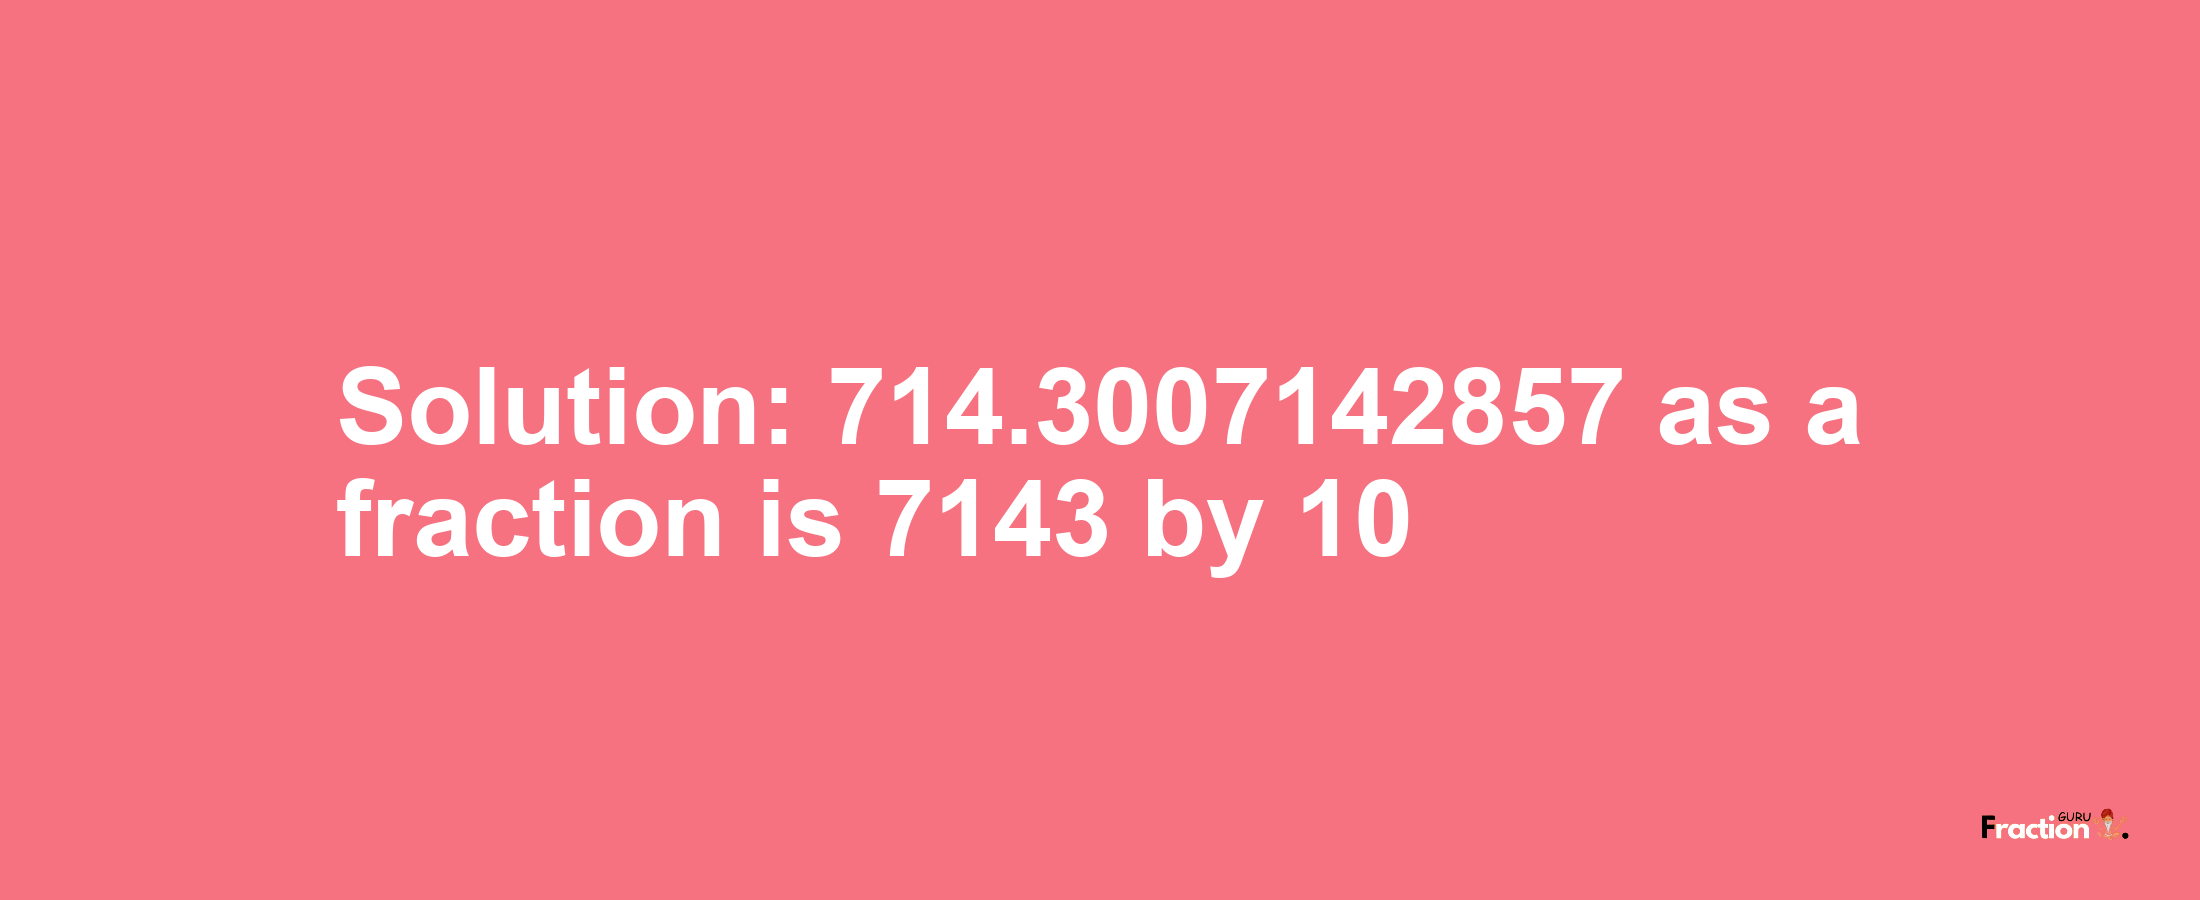 Solution:714.3007142857 as a fraction is 7143/10